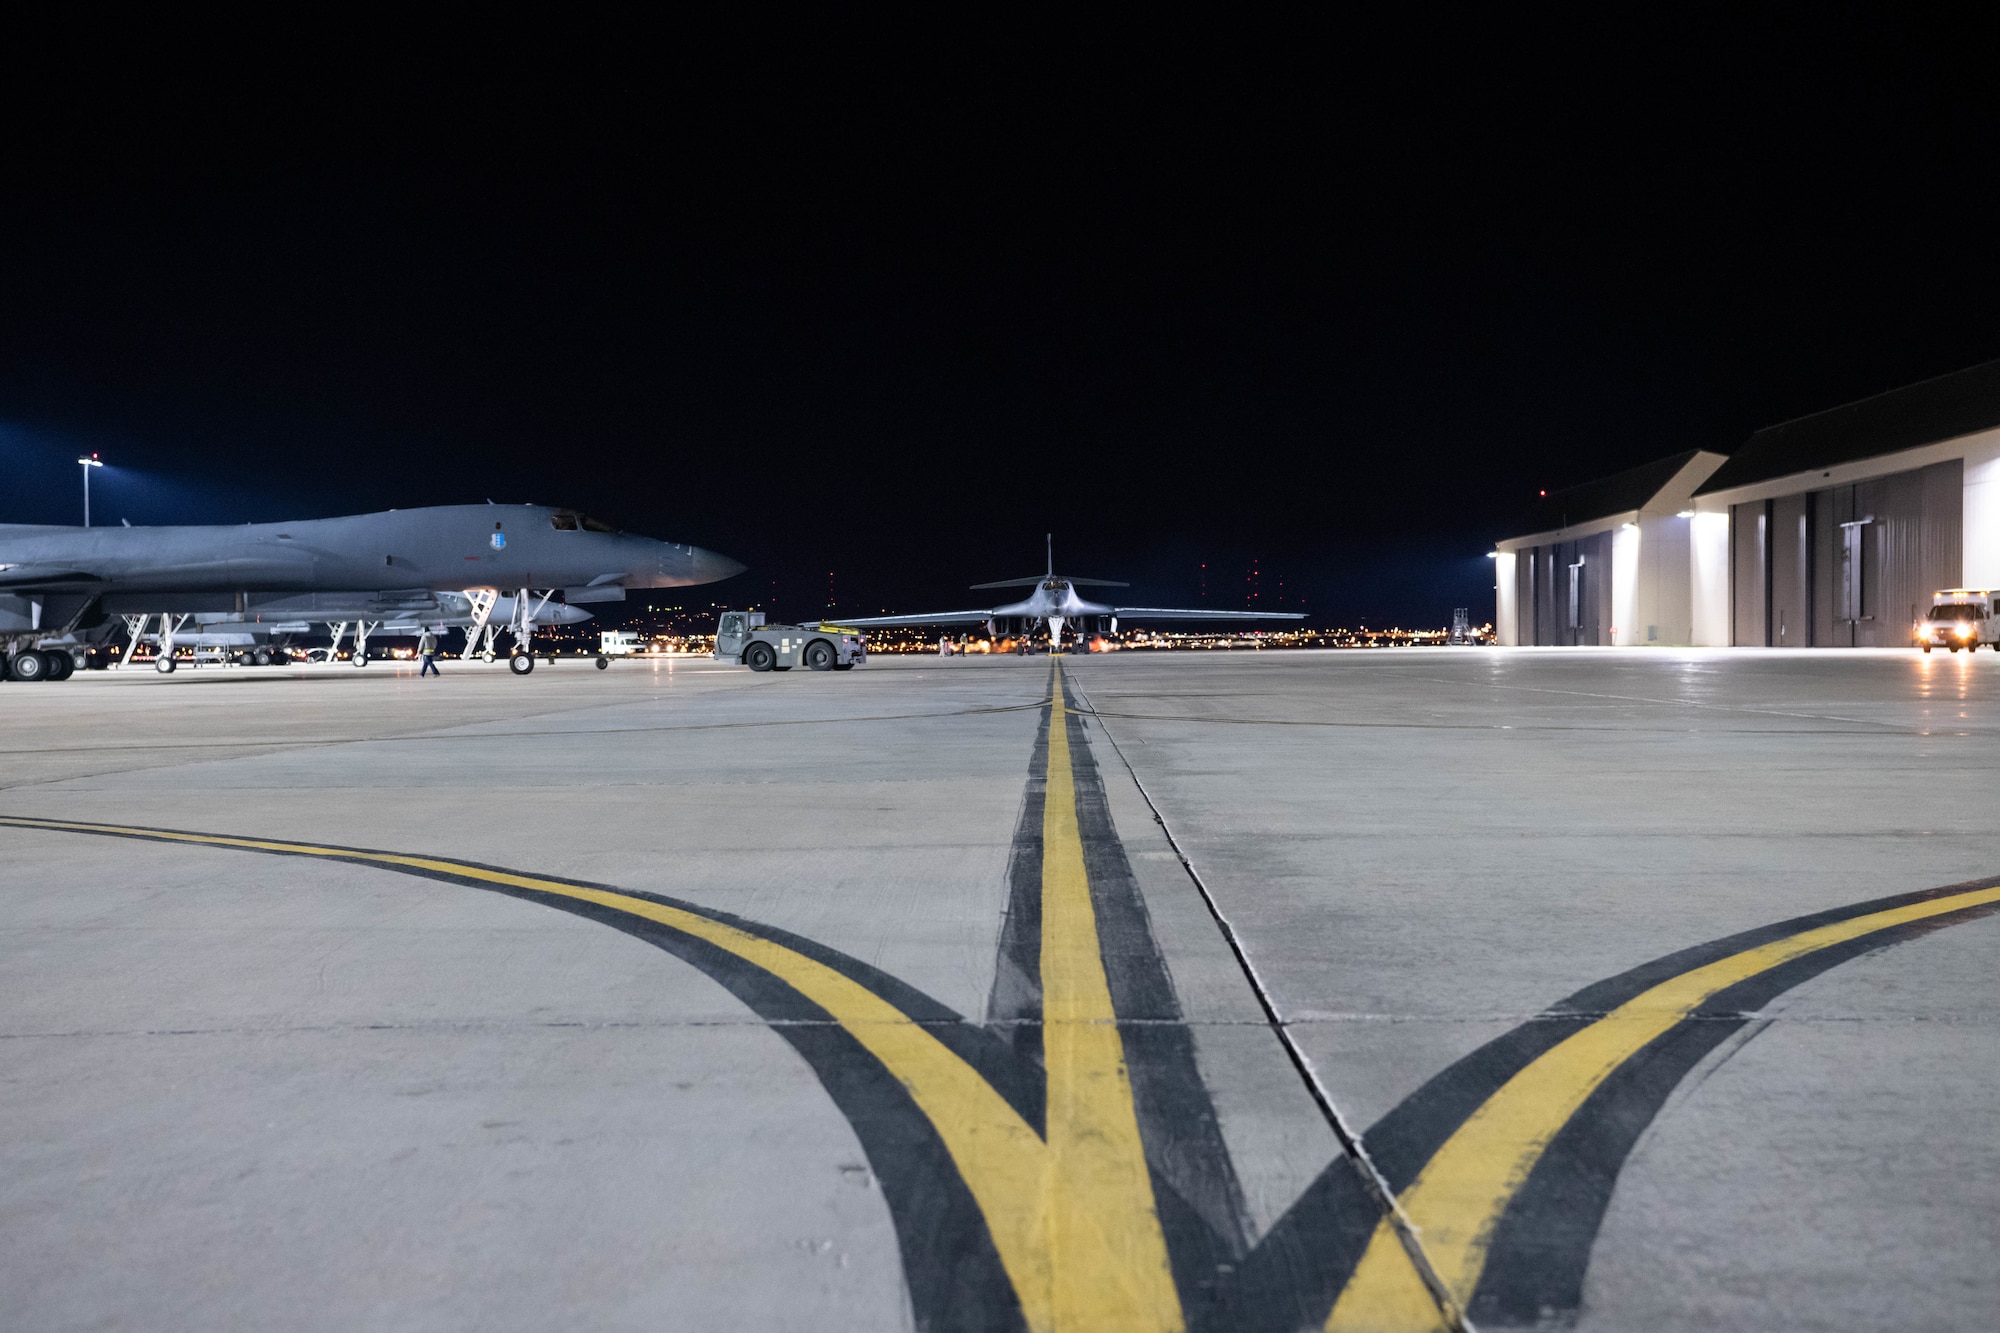 Two B-1B Lancers taxi to their spots on the flight line after landing at Ellsworth Air Force Base, S.D., April 30, 2020. The B-1s, assigned to the 28th Bomb Wing, flew a 32-hour round-trip sortie to conduct operations over the South China Sea as part of a joint U.S. Indo-Pacific Command and U.S. Strategic Command Bomber Task Force mission. (U.S. Air Force photo by Tech. Sgt. Jette Carr)